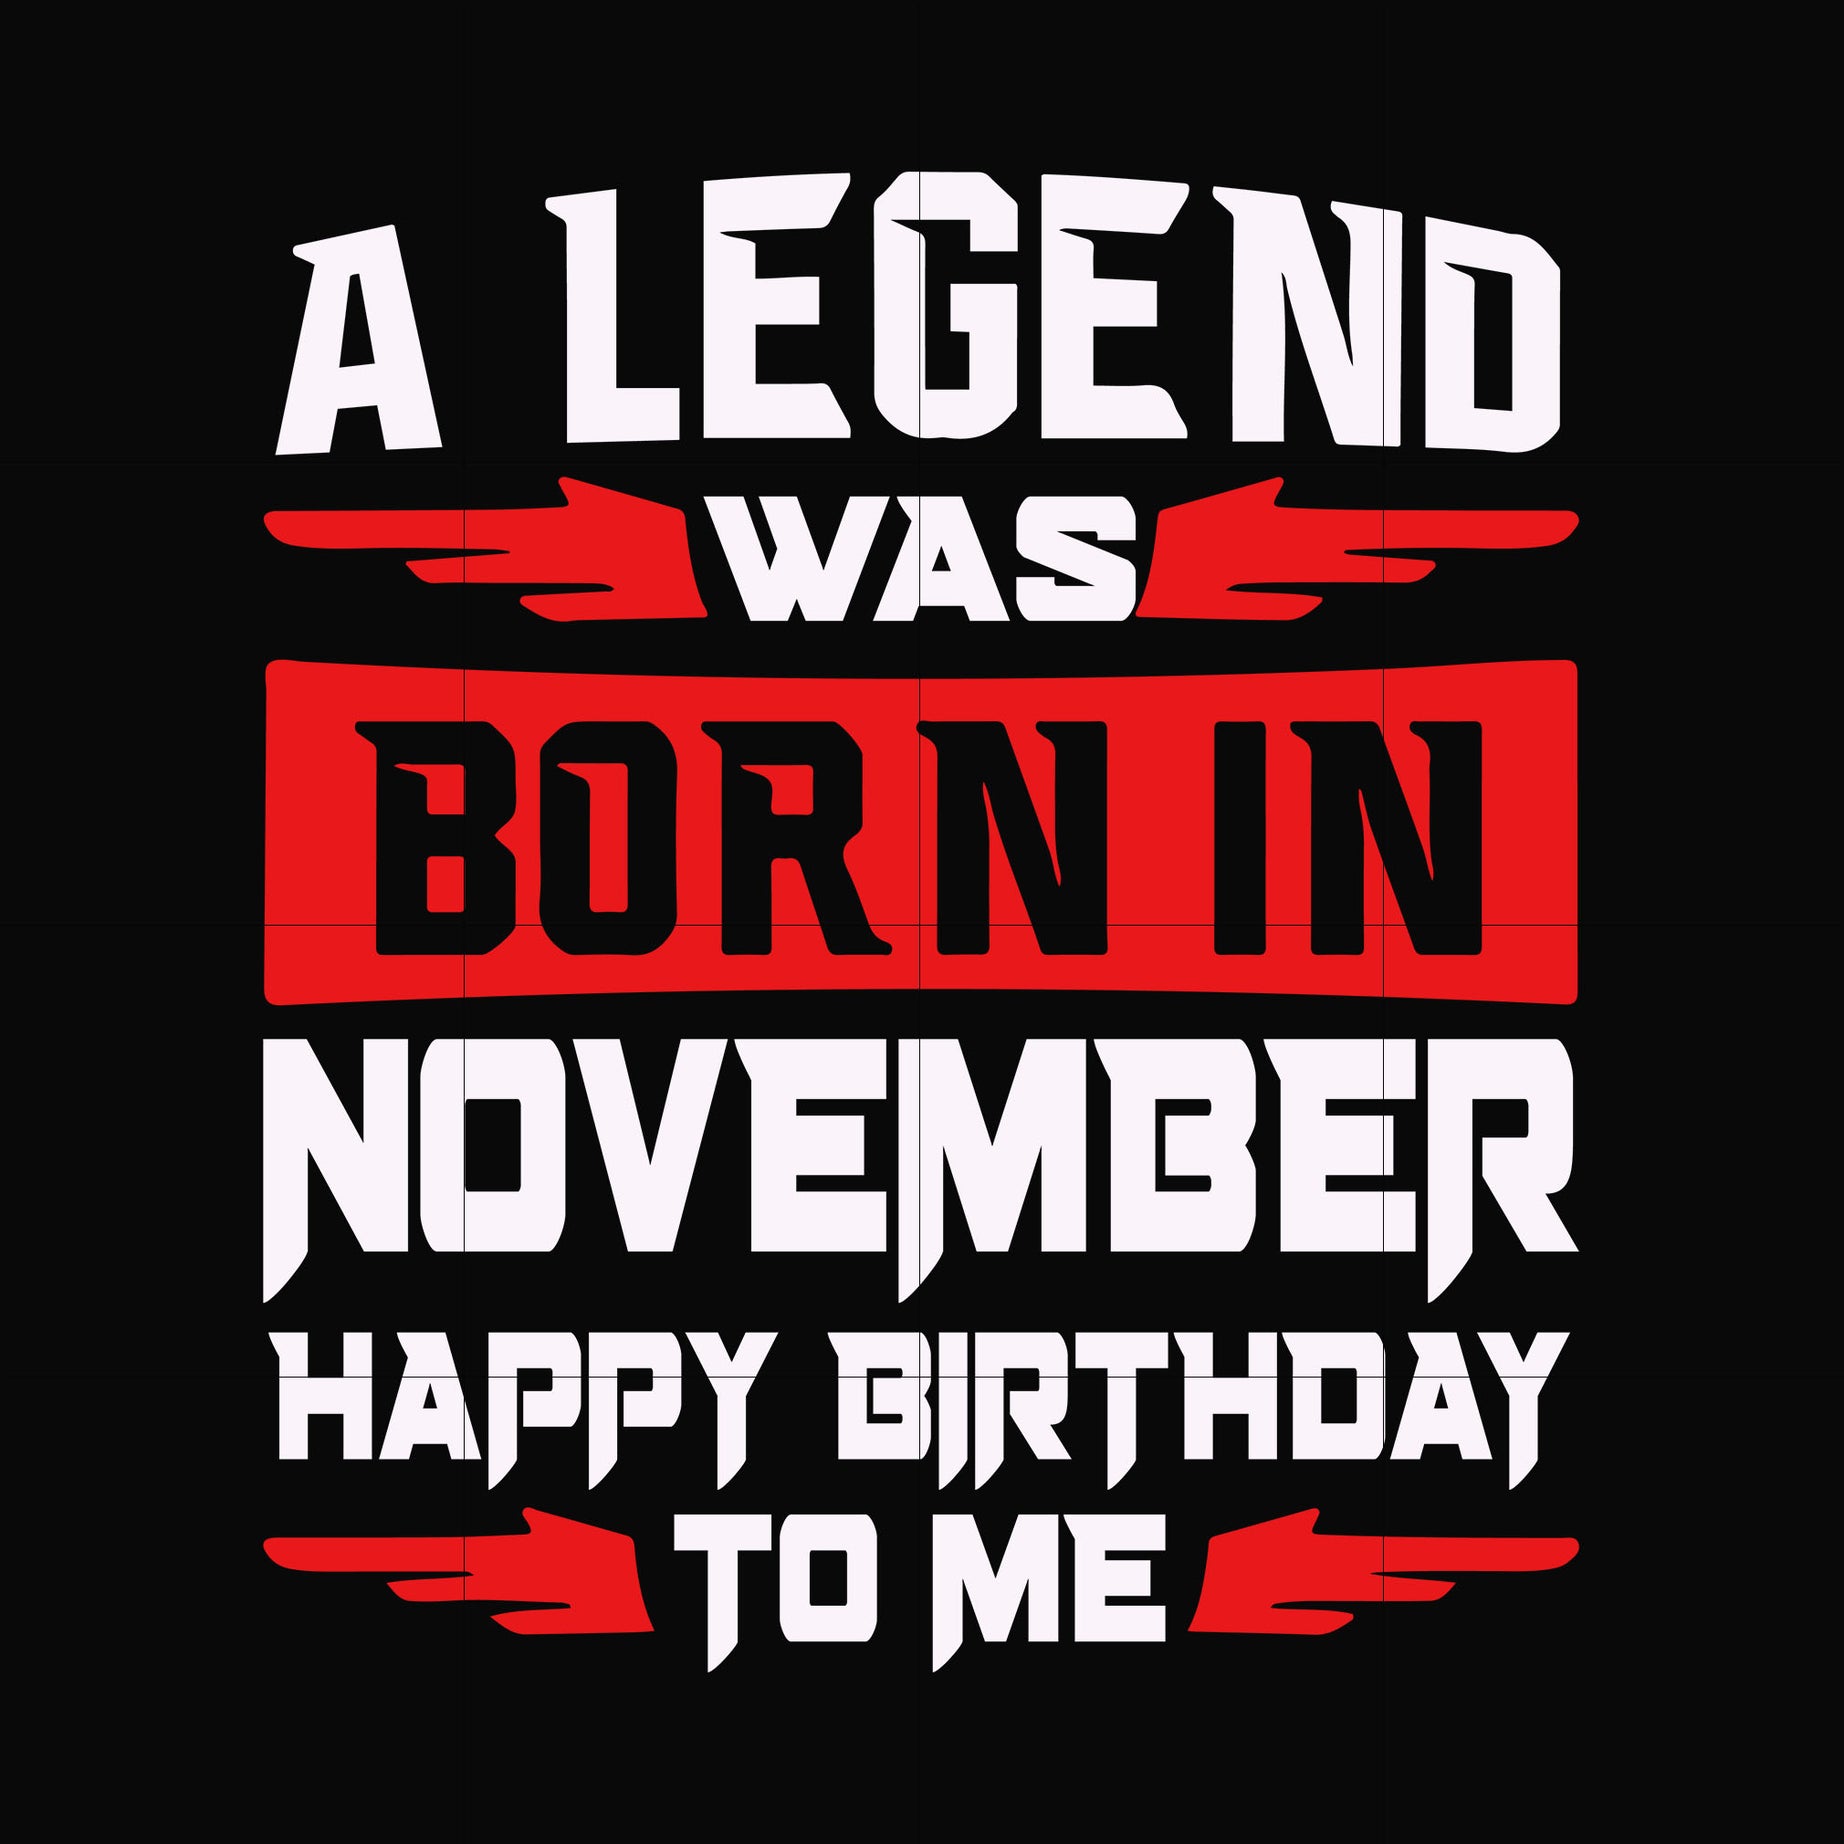 A legend was born in November happy birthday to me svg, png, dxf, eps digital file BD0120